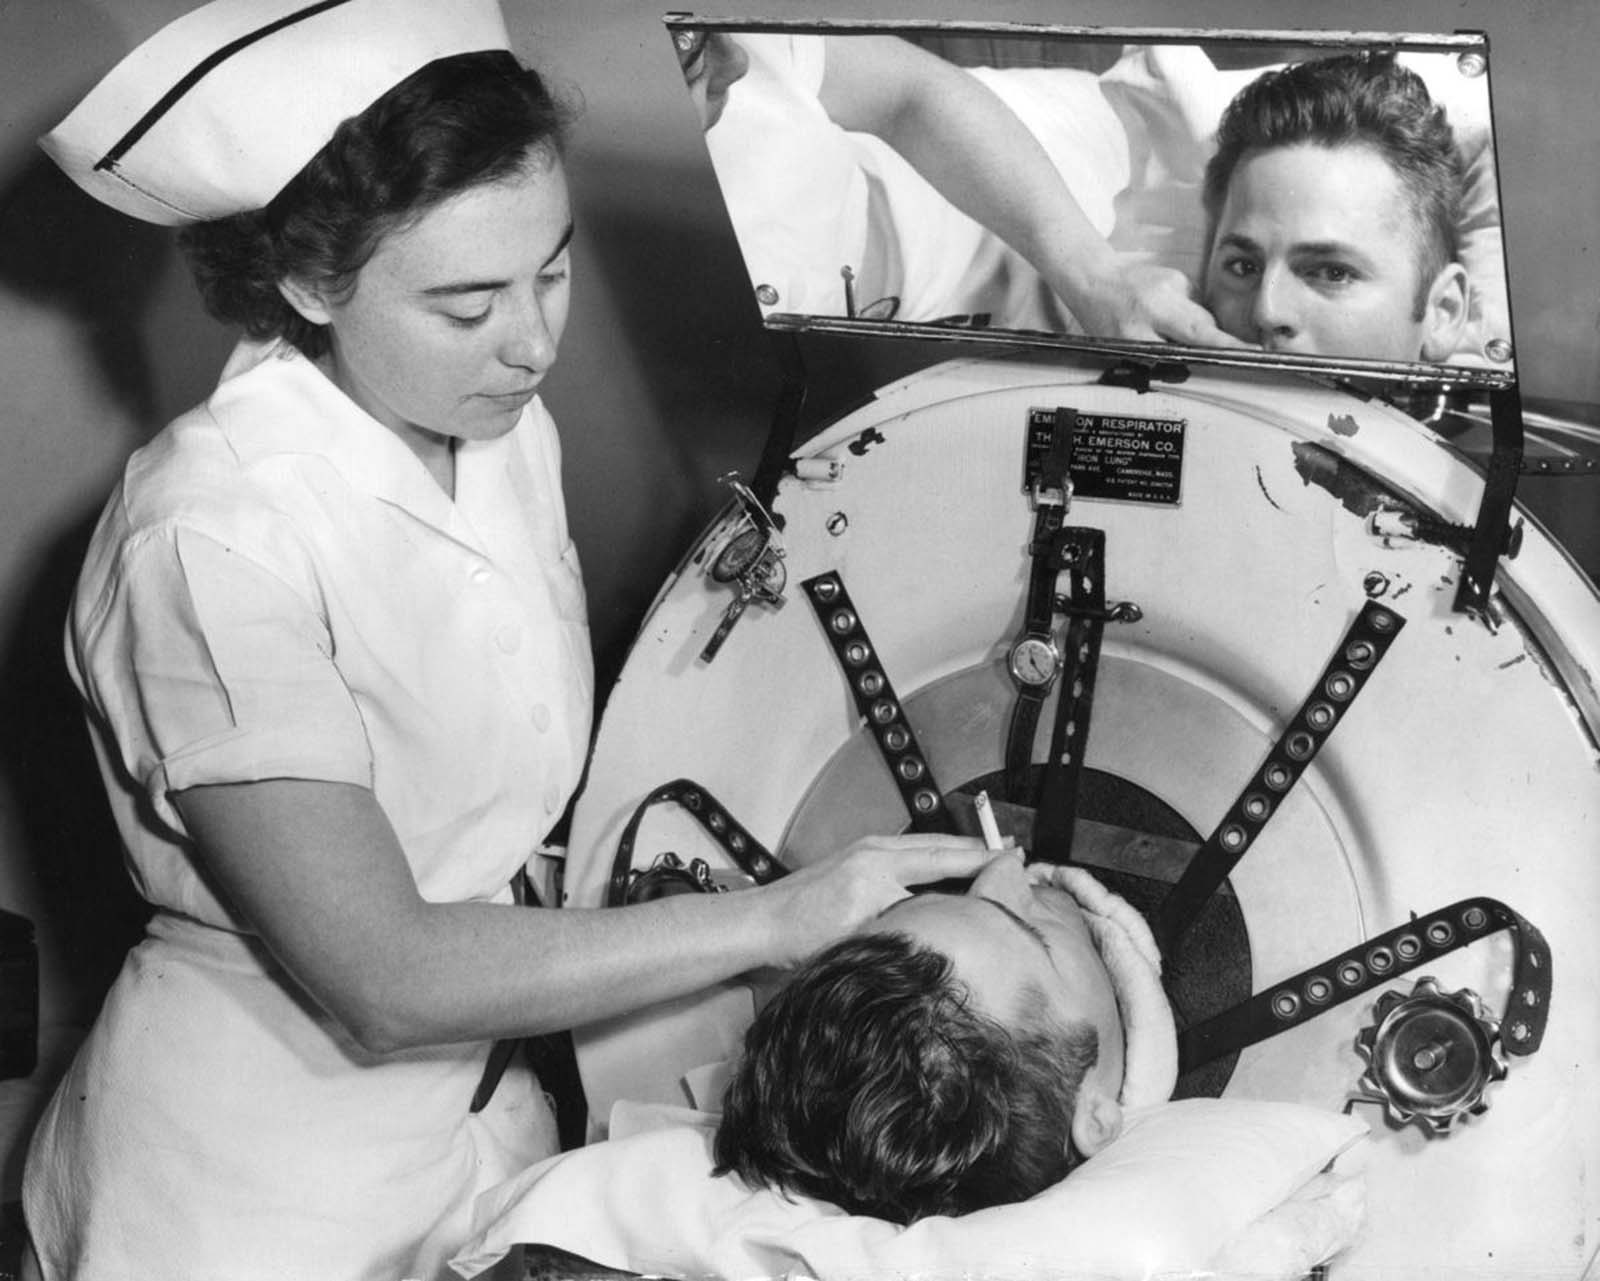 Verne Muskopf, a nurse at St. Anthony's Hospital, South Grand Boulevard and Chippewa Street, helps iron-lung patient Louis Abercrombie smoke a cigarette in November 1949. Abercrombie was a polio patient and had been in an iron lung for almost three years. Hospital policies on smoking were different then. 